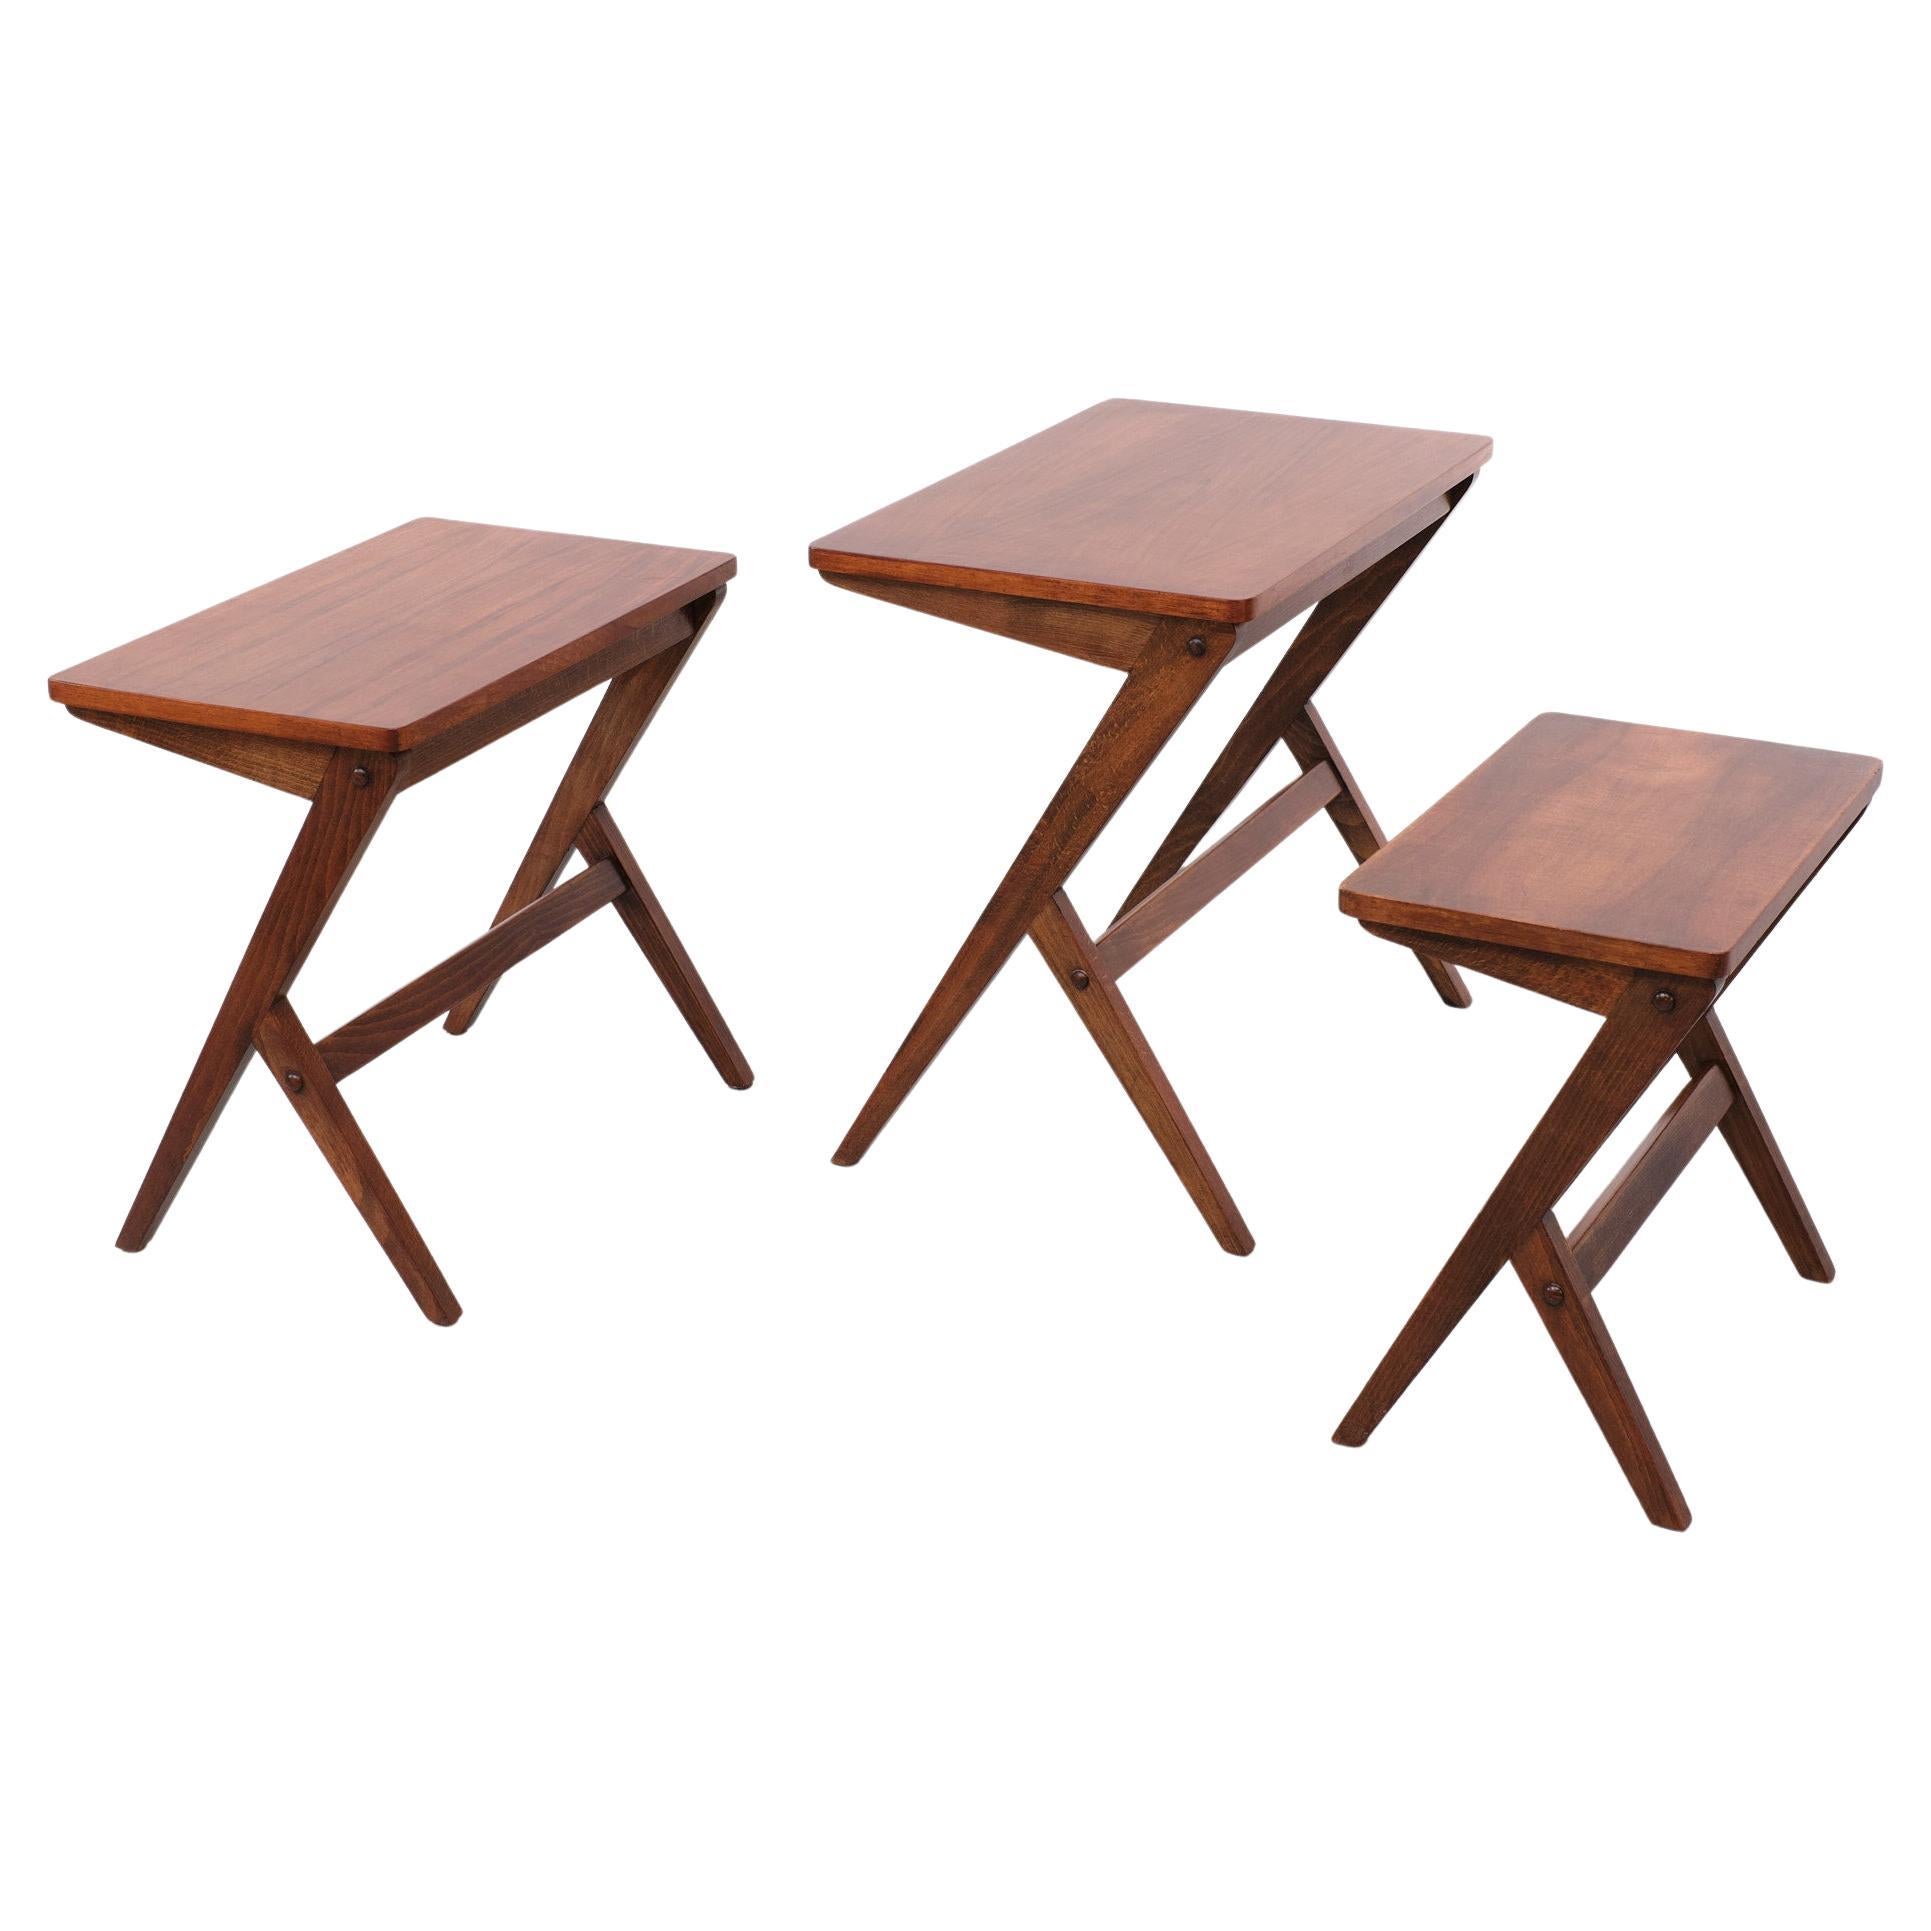 Mid-20th Century  Vintage Nesting Tables in Walnut by Bengt Ruda  Sweden   1950s For Sale